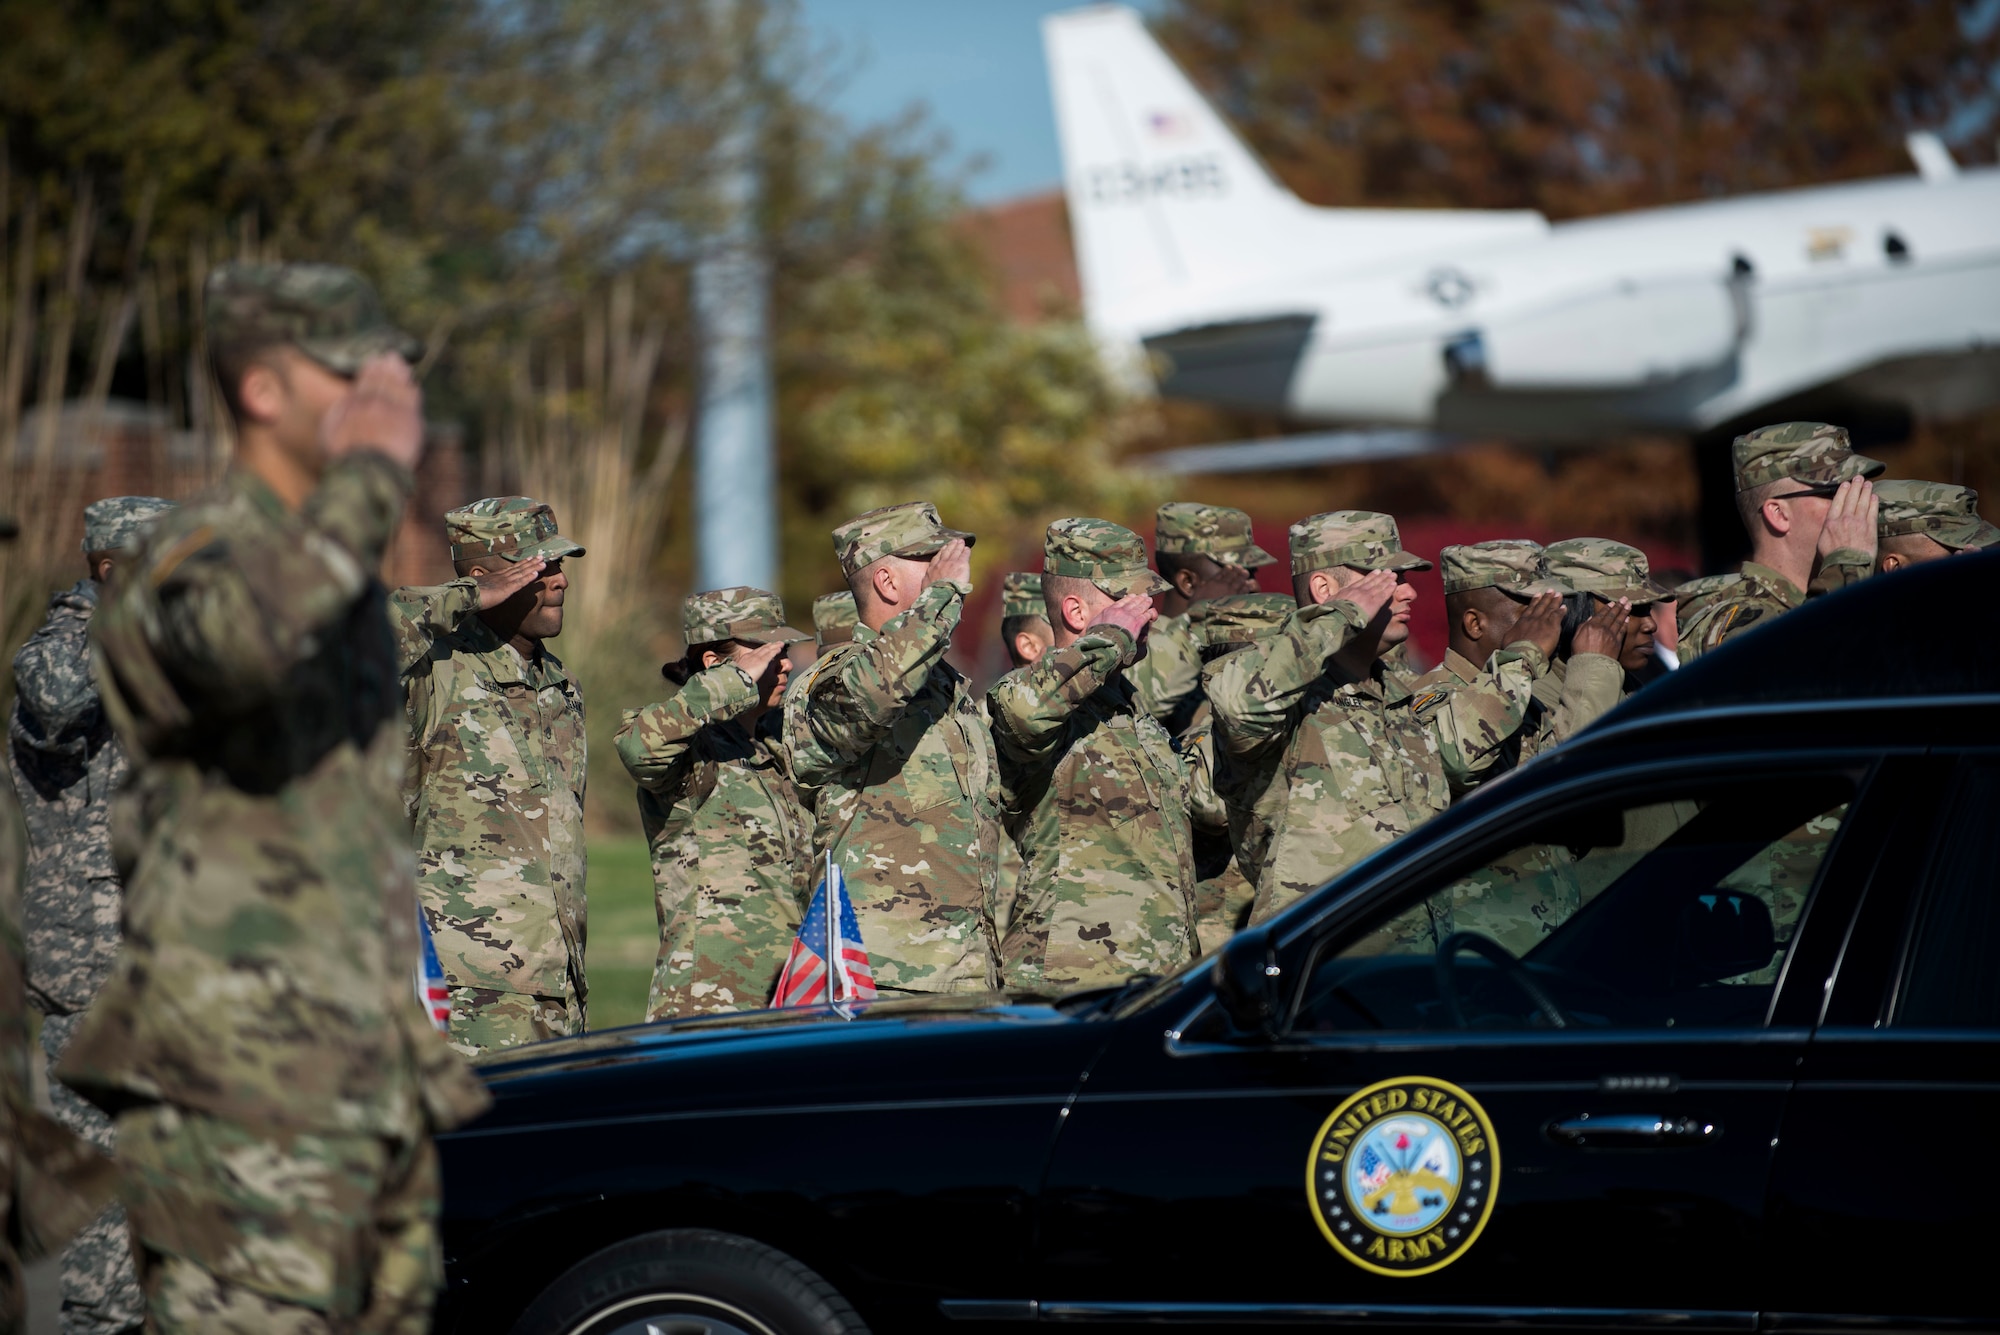 Soldiers stationed at Scott Air Force Base, Illinois salute during a dignified transfer ceremony for Pfc. Tyler Iubelt 21 Nov., 2016, at Scott Air Force Base, Illinois. Iubelt passed away on 12 Nov. while deployed to Bagram, Afghanistan. (U.S. Air Force photo by Staff Sgt. Clayton Lenhardt)